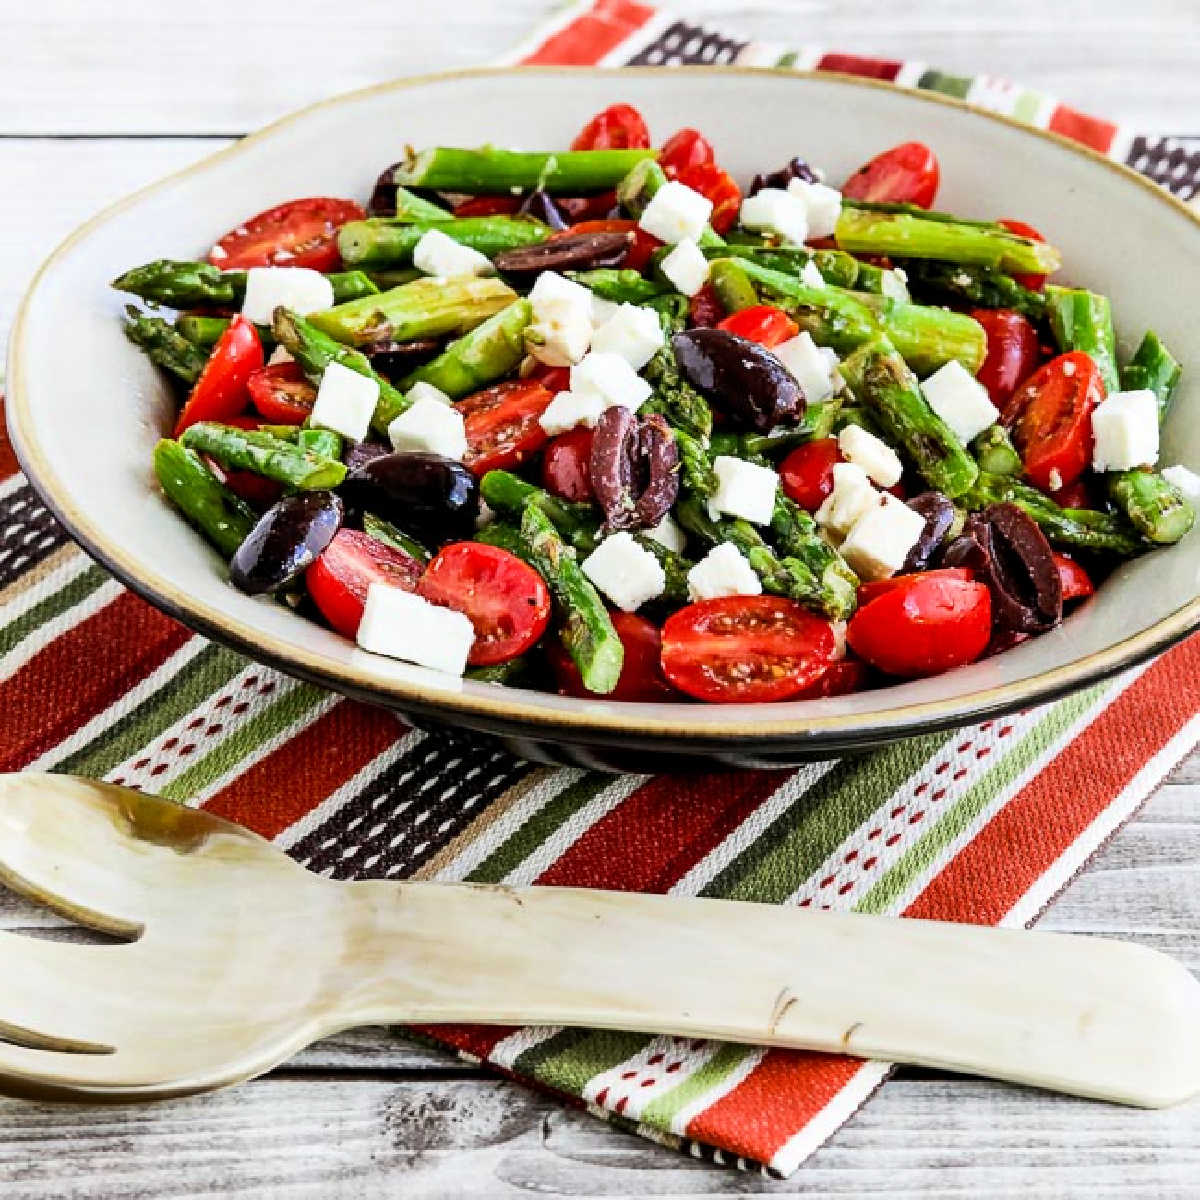 Square image of Asparagus Salad with Tomatoes, Olives, and Feta in serving bowl on colorful napkin.